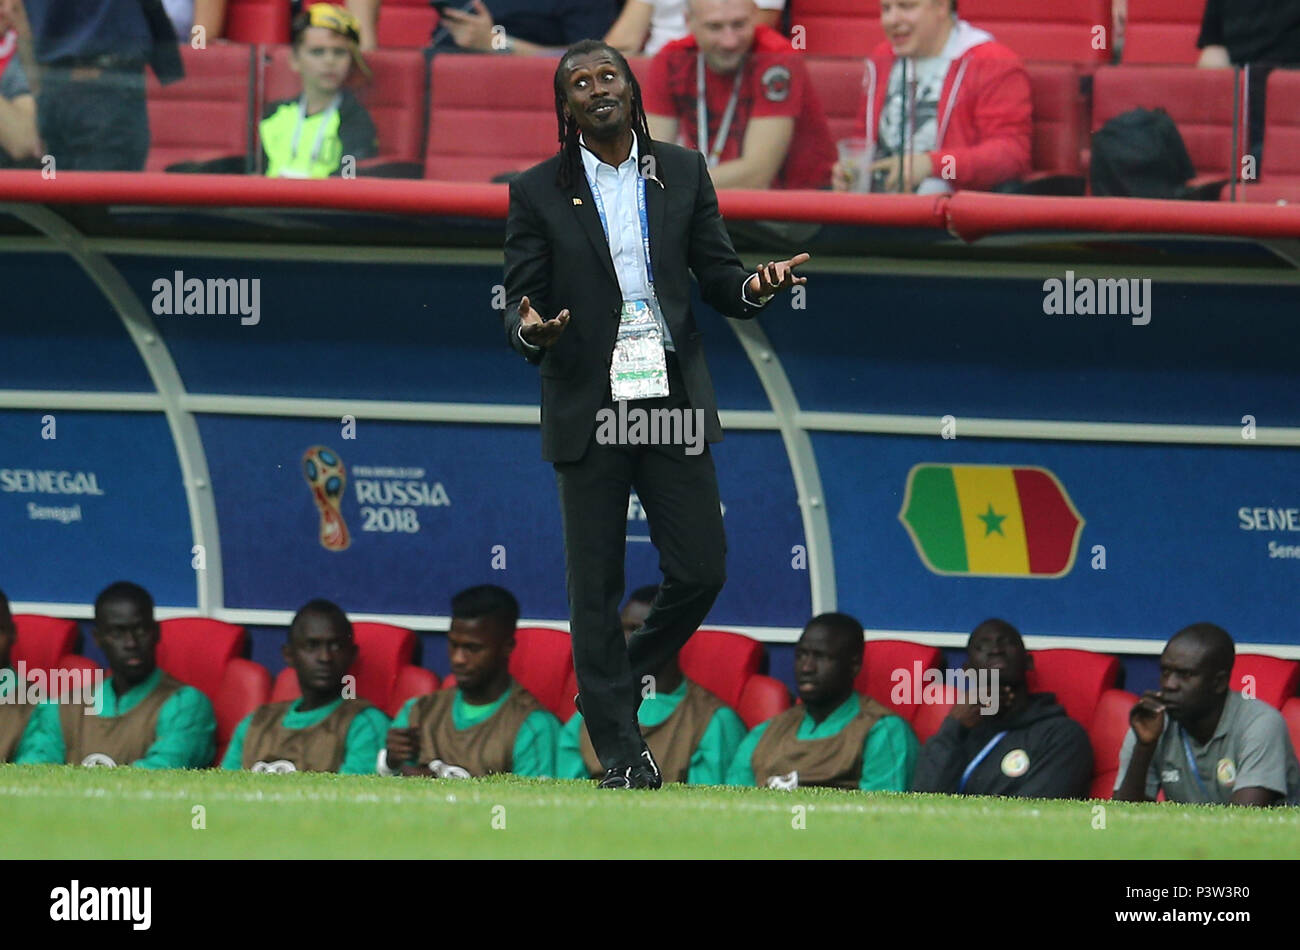 Moscow, Russia. 19th Jun, 2018.ALIOU CISSE during the Fifa World Cup Russia 2018, Group H, football match between POLAND v SENEGAL in Spartak Stadium in Moscow. Credit: Independent Photo Agency Srl/Alamy Live News Stock Photo